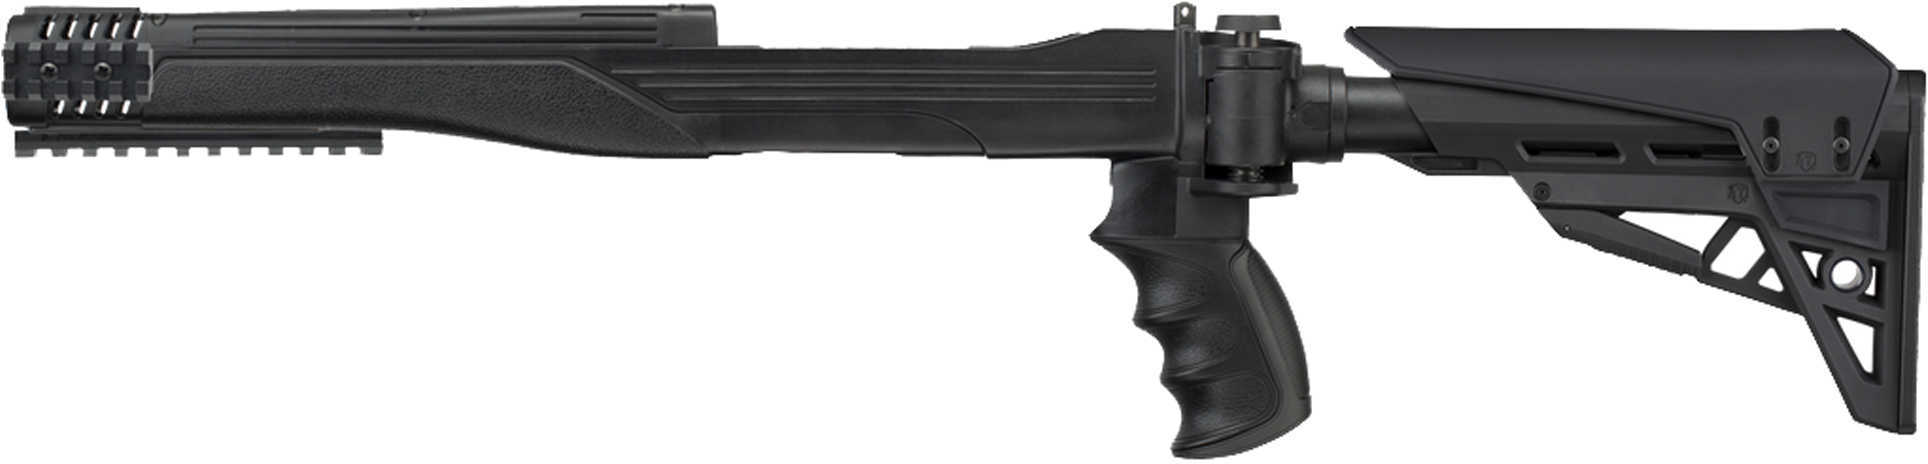 Adv. Tech. Ruger® 10/22® Strike Force Stock W/Recoil System